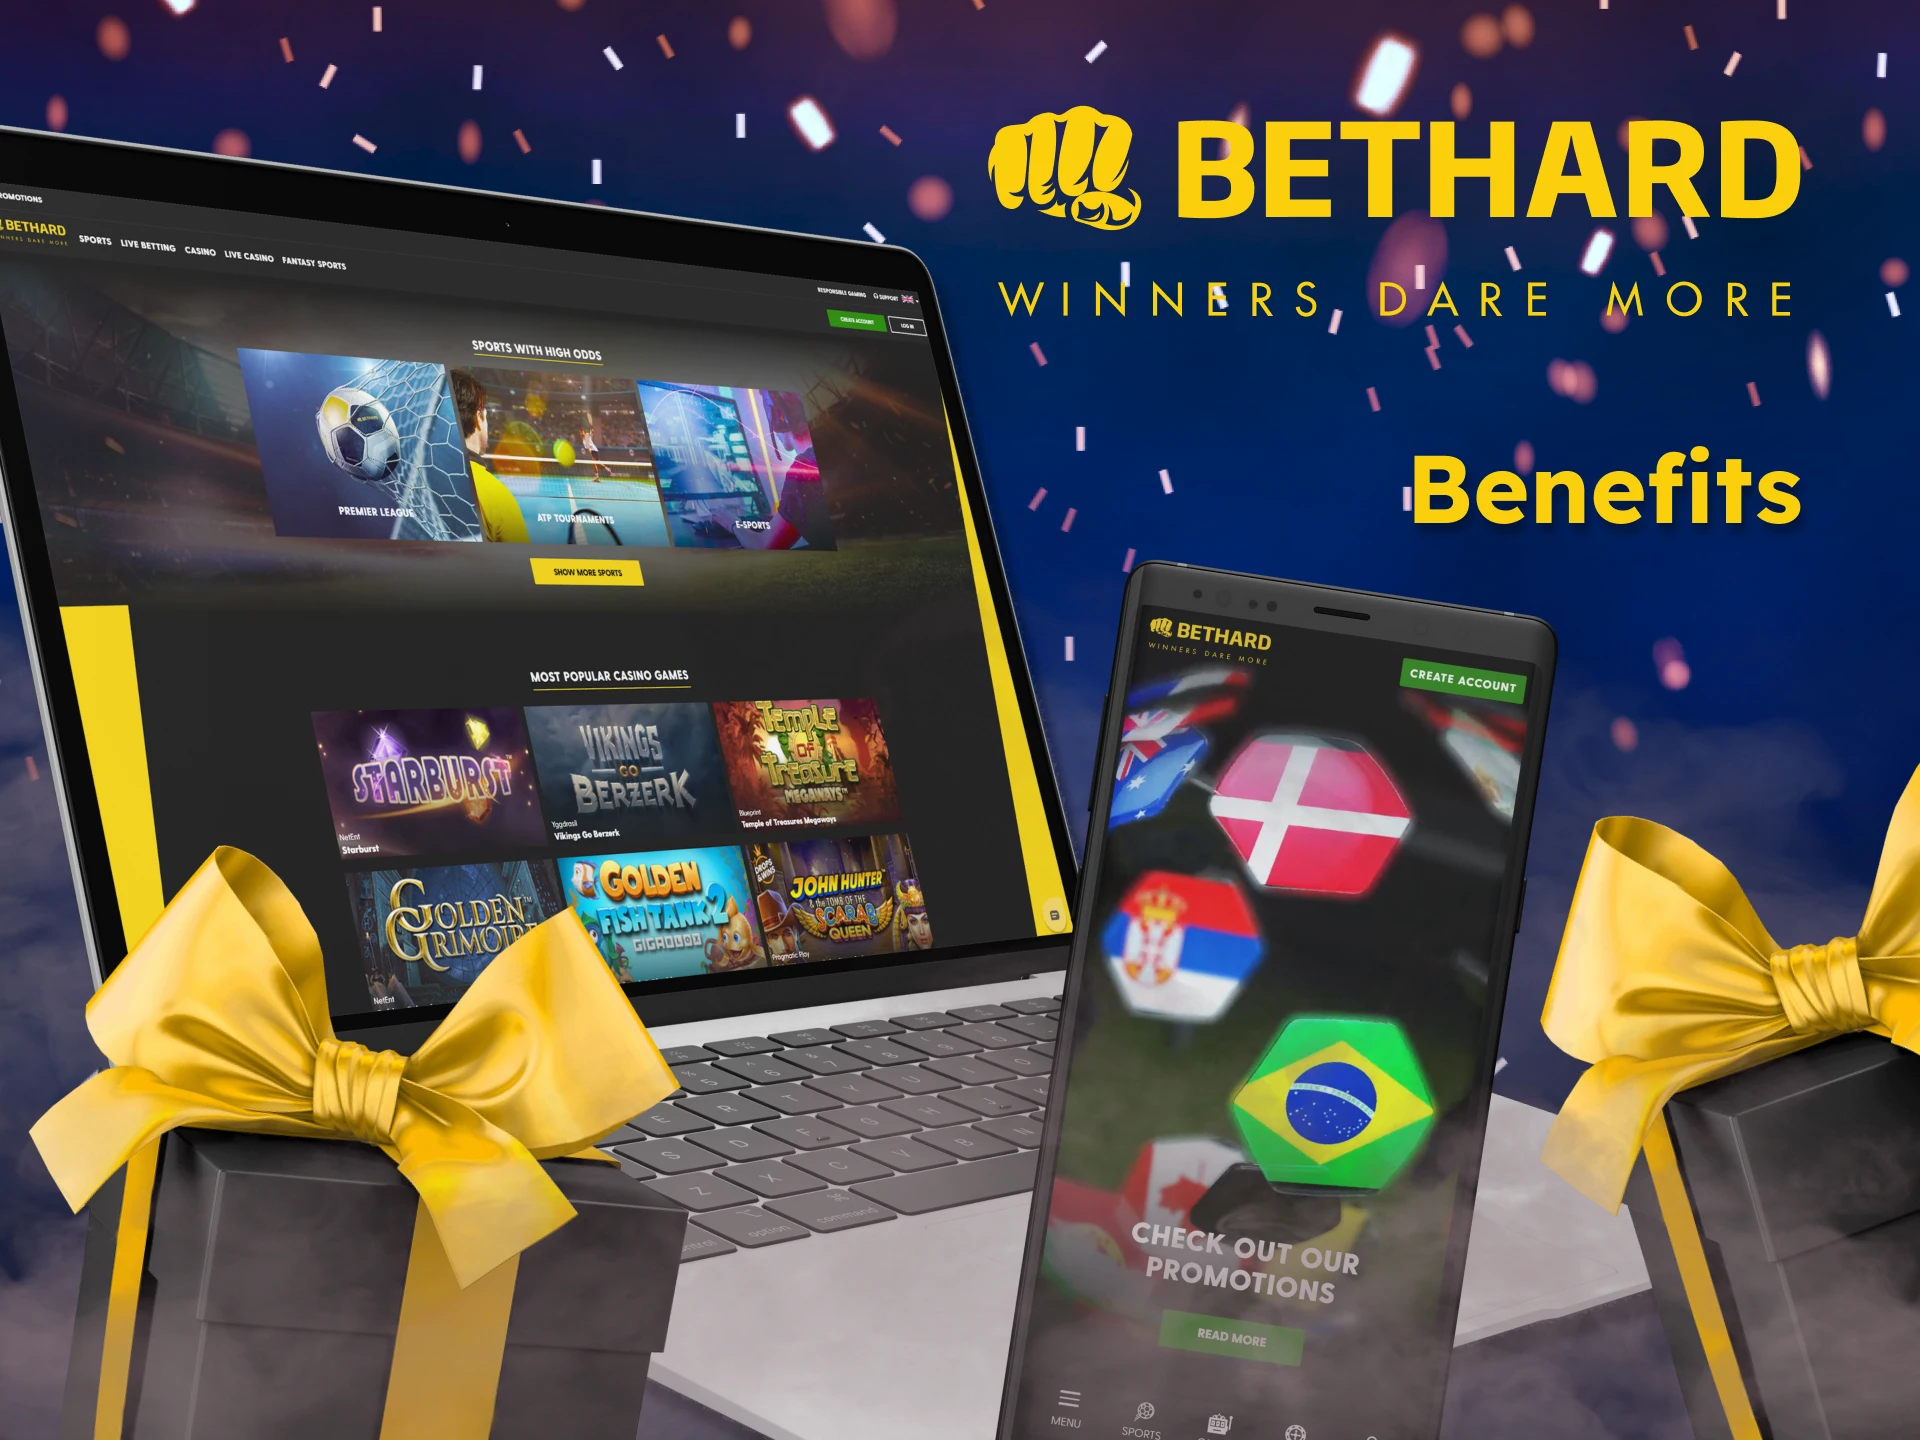 With Bethard you get a lot of benefits for betting and playing casino games.